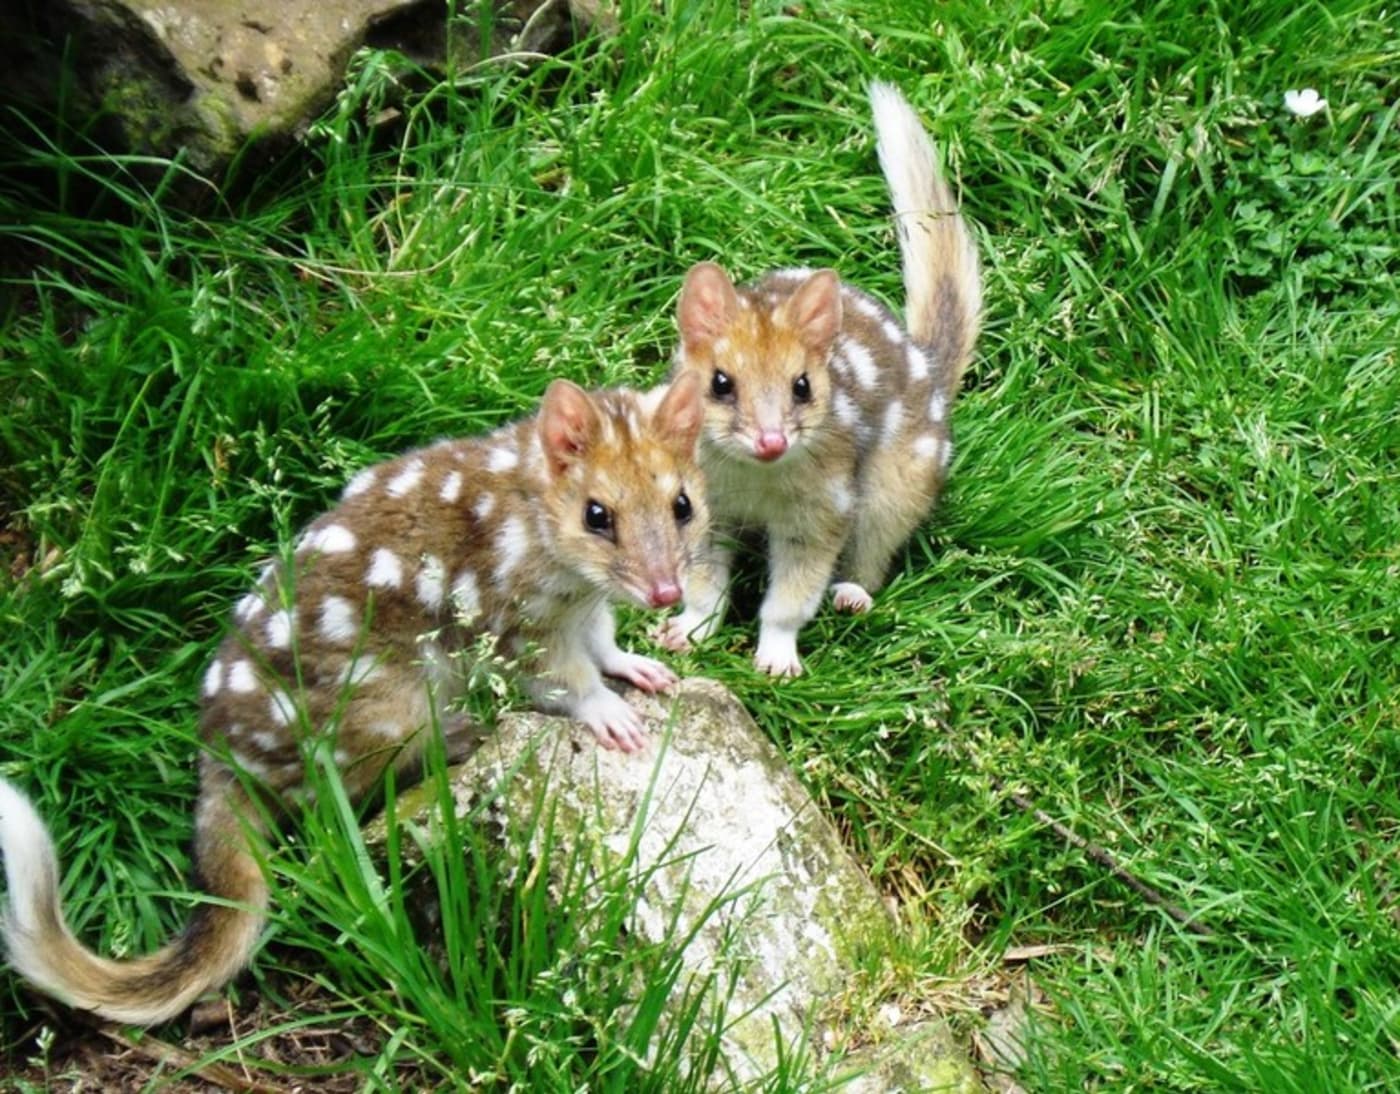 Rewilding Australia and WWF-Australia are supporting Wildlife Sanctuaries in Tasmania – Devils@Cradle and Trowunna Wildlife Park – to expand their captive breeding program for eastern quolls.